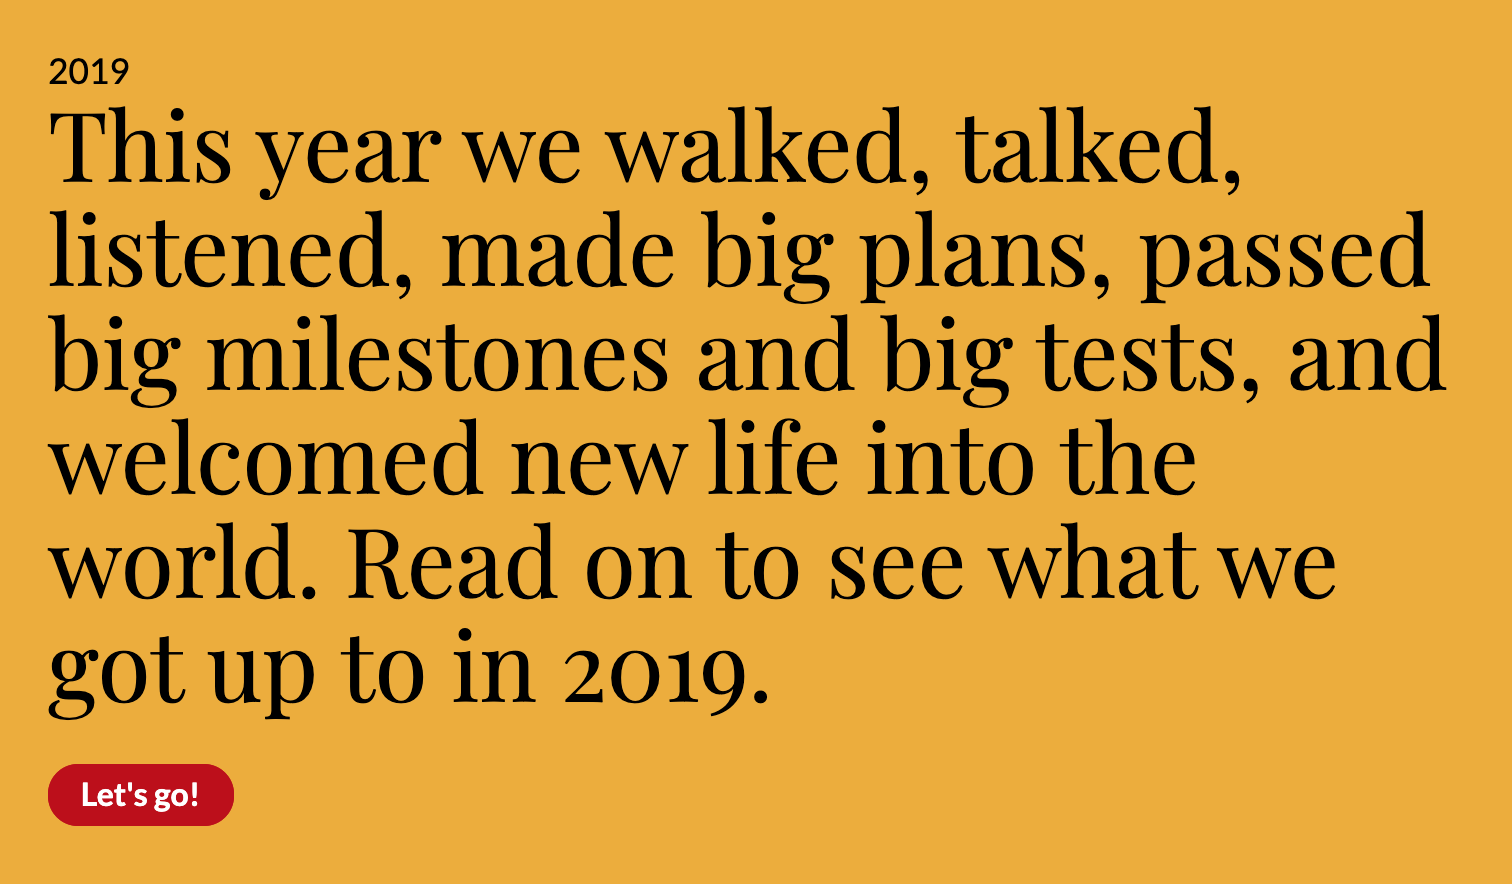 This year we walked, talked, listened, made big plans, passed big milestones and big tests, and welcomed new life into the world. Read on to see what we got up to in 2019.